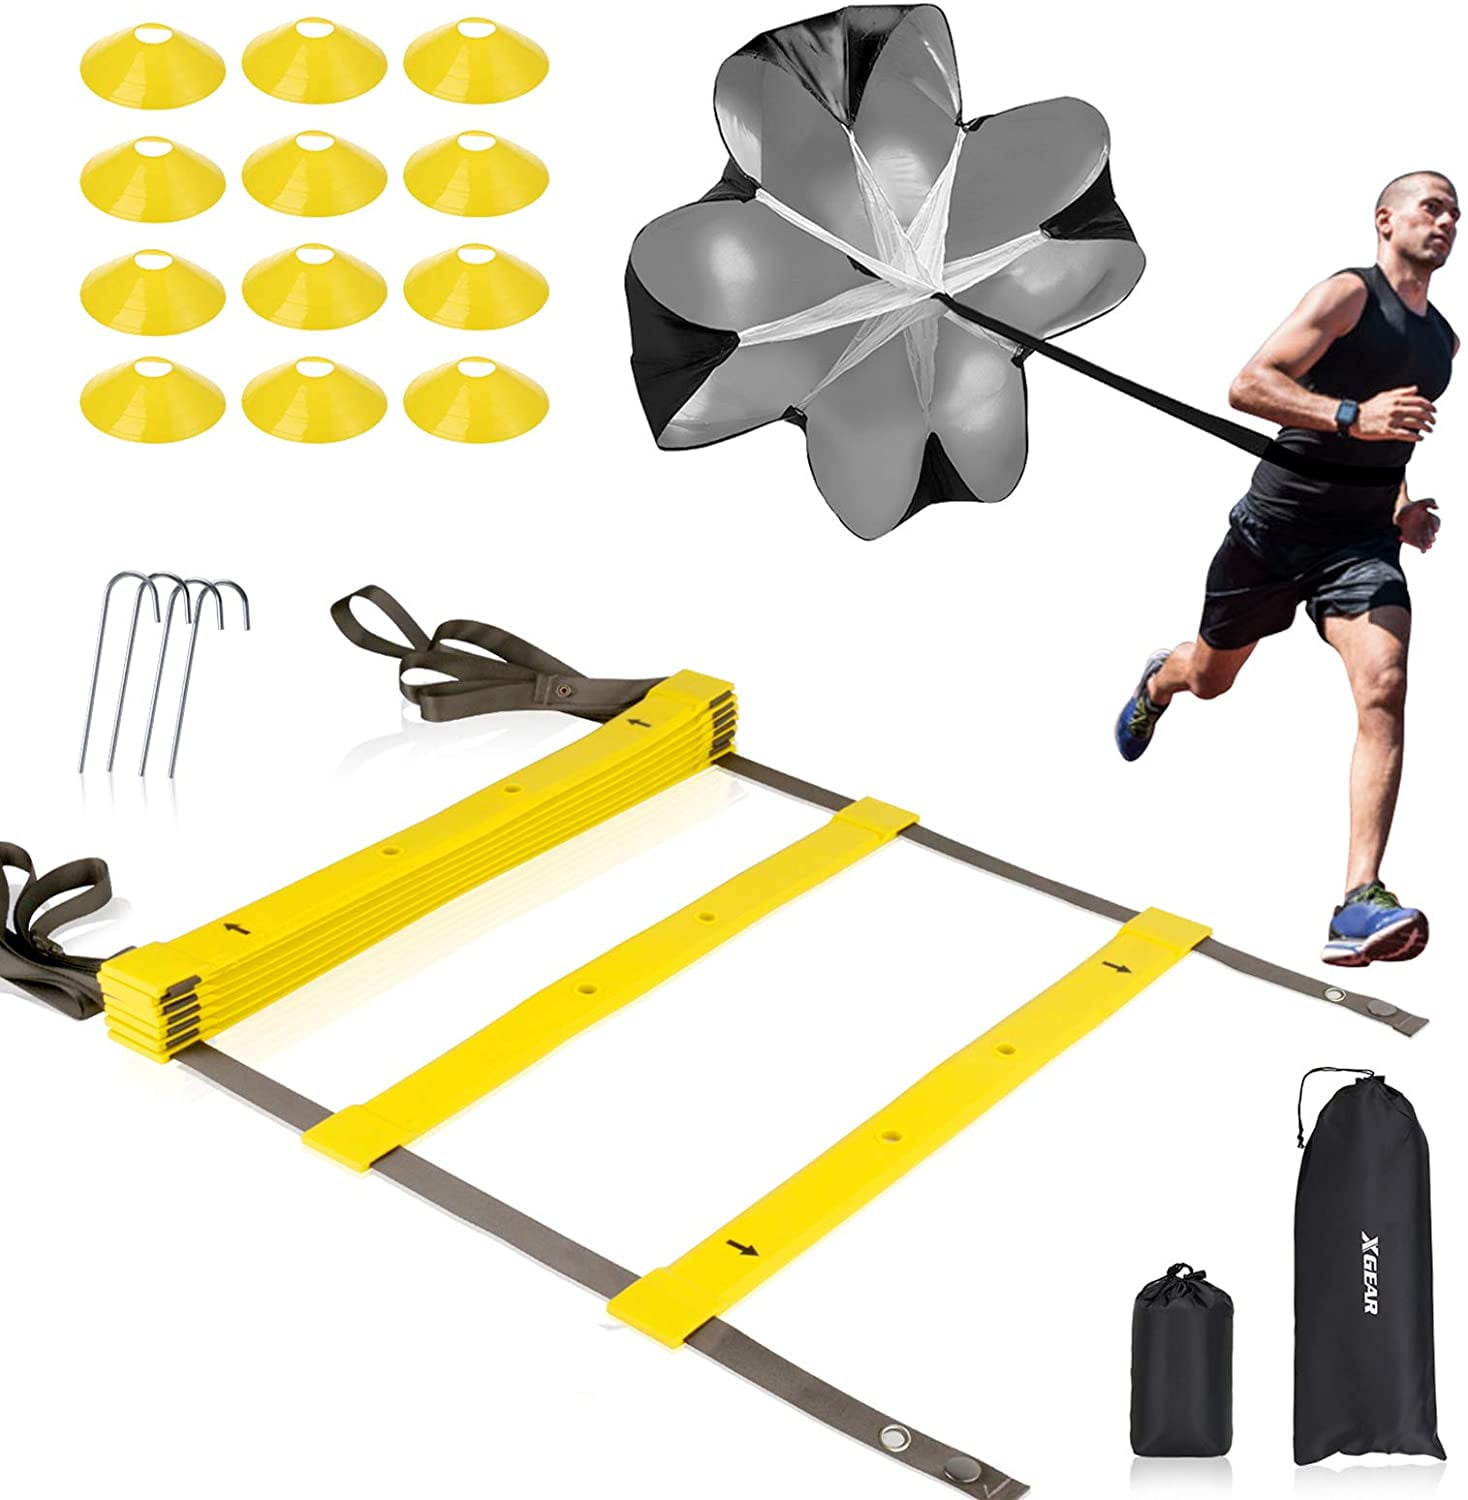 Includes Agility Ladder 6 Disc Cones Speed and Agility Training Set 